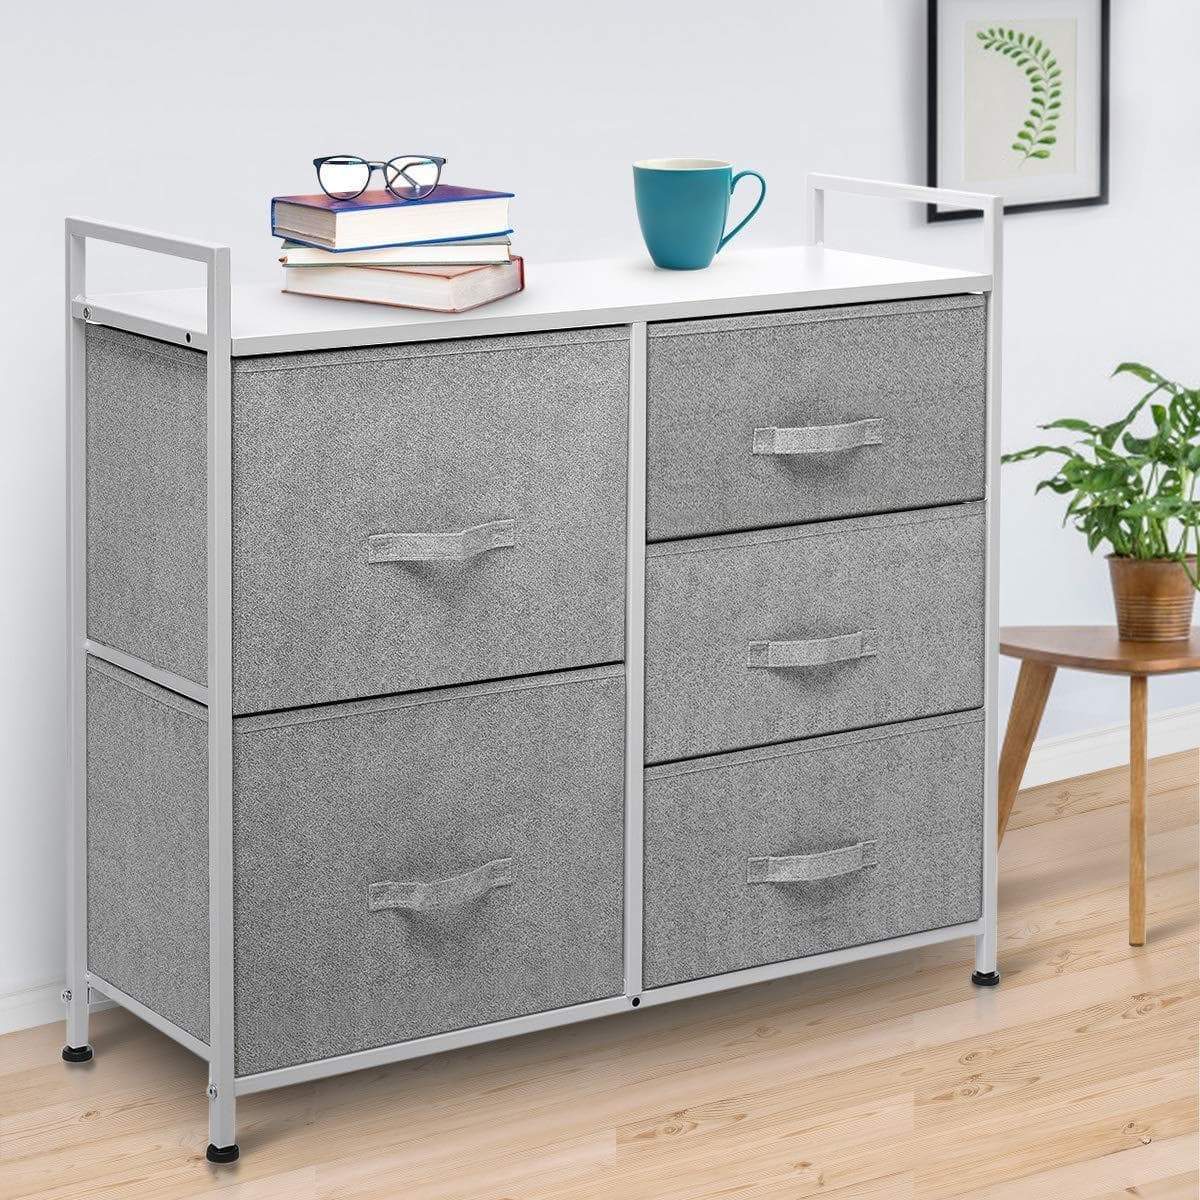 Best seller  kingso fabric 5 drawer dresser storage tower organizer unit with sturdy steel frame and easy pull faux linen drawers for bedroom living room guest room dorm closet grey